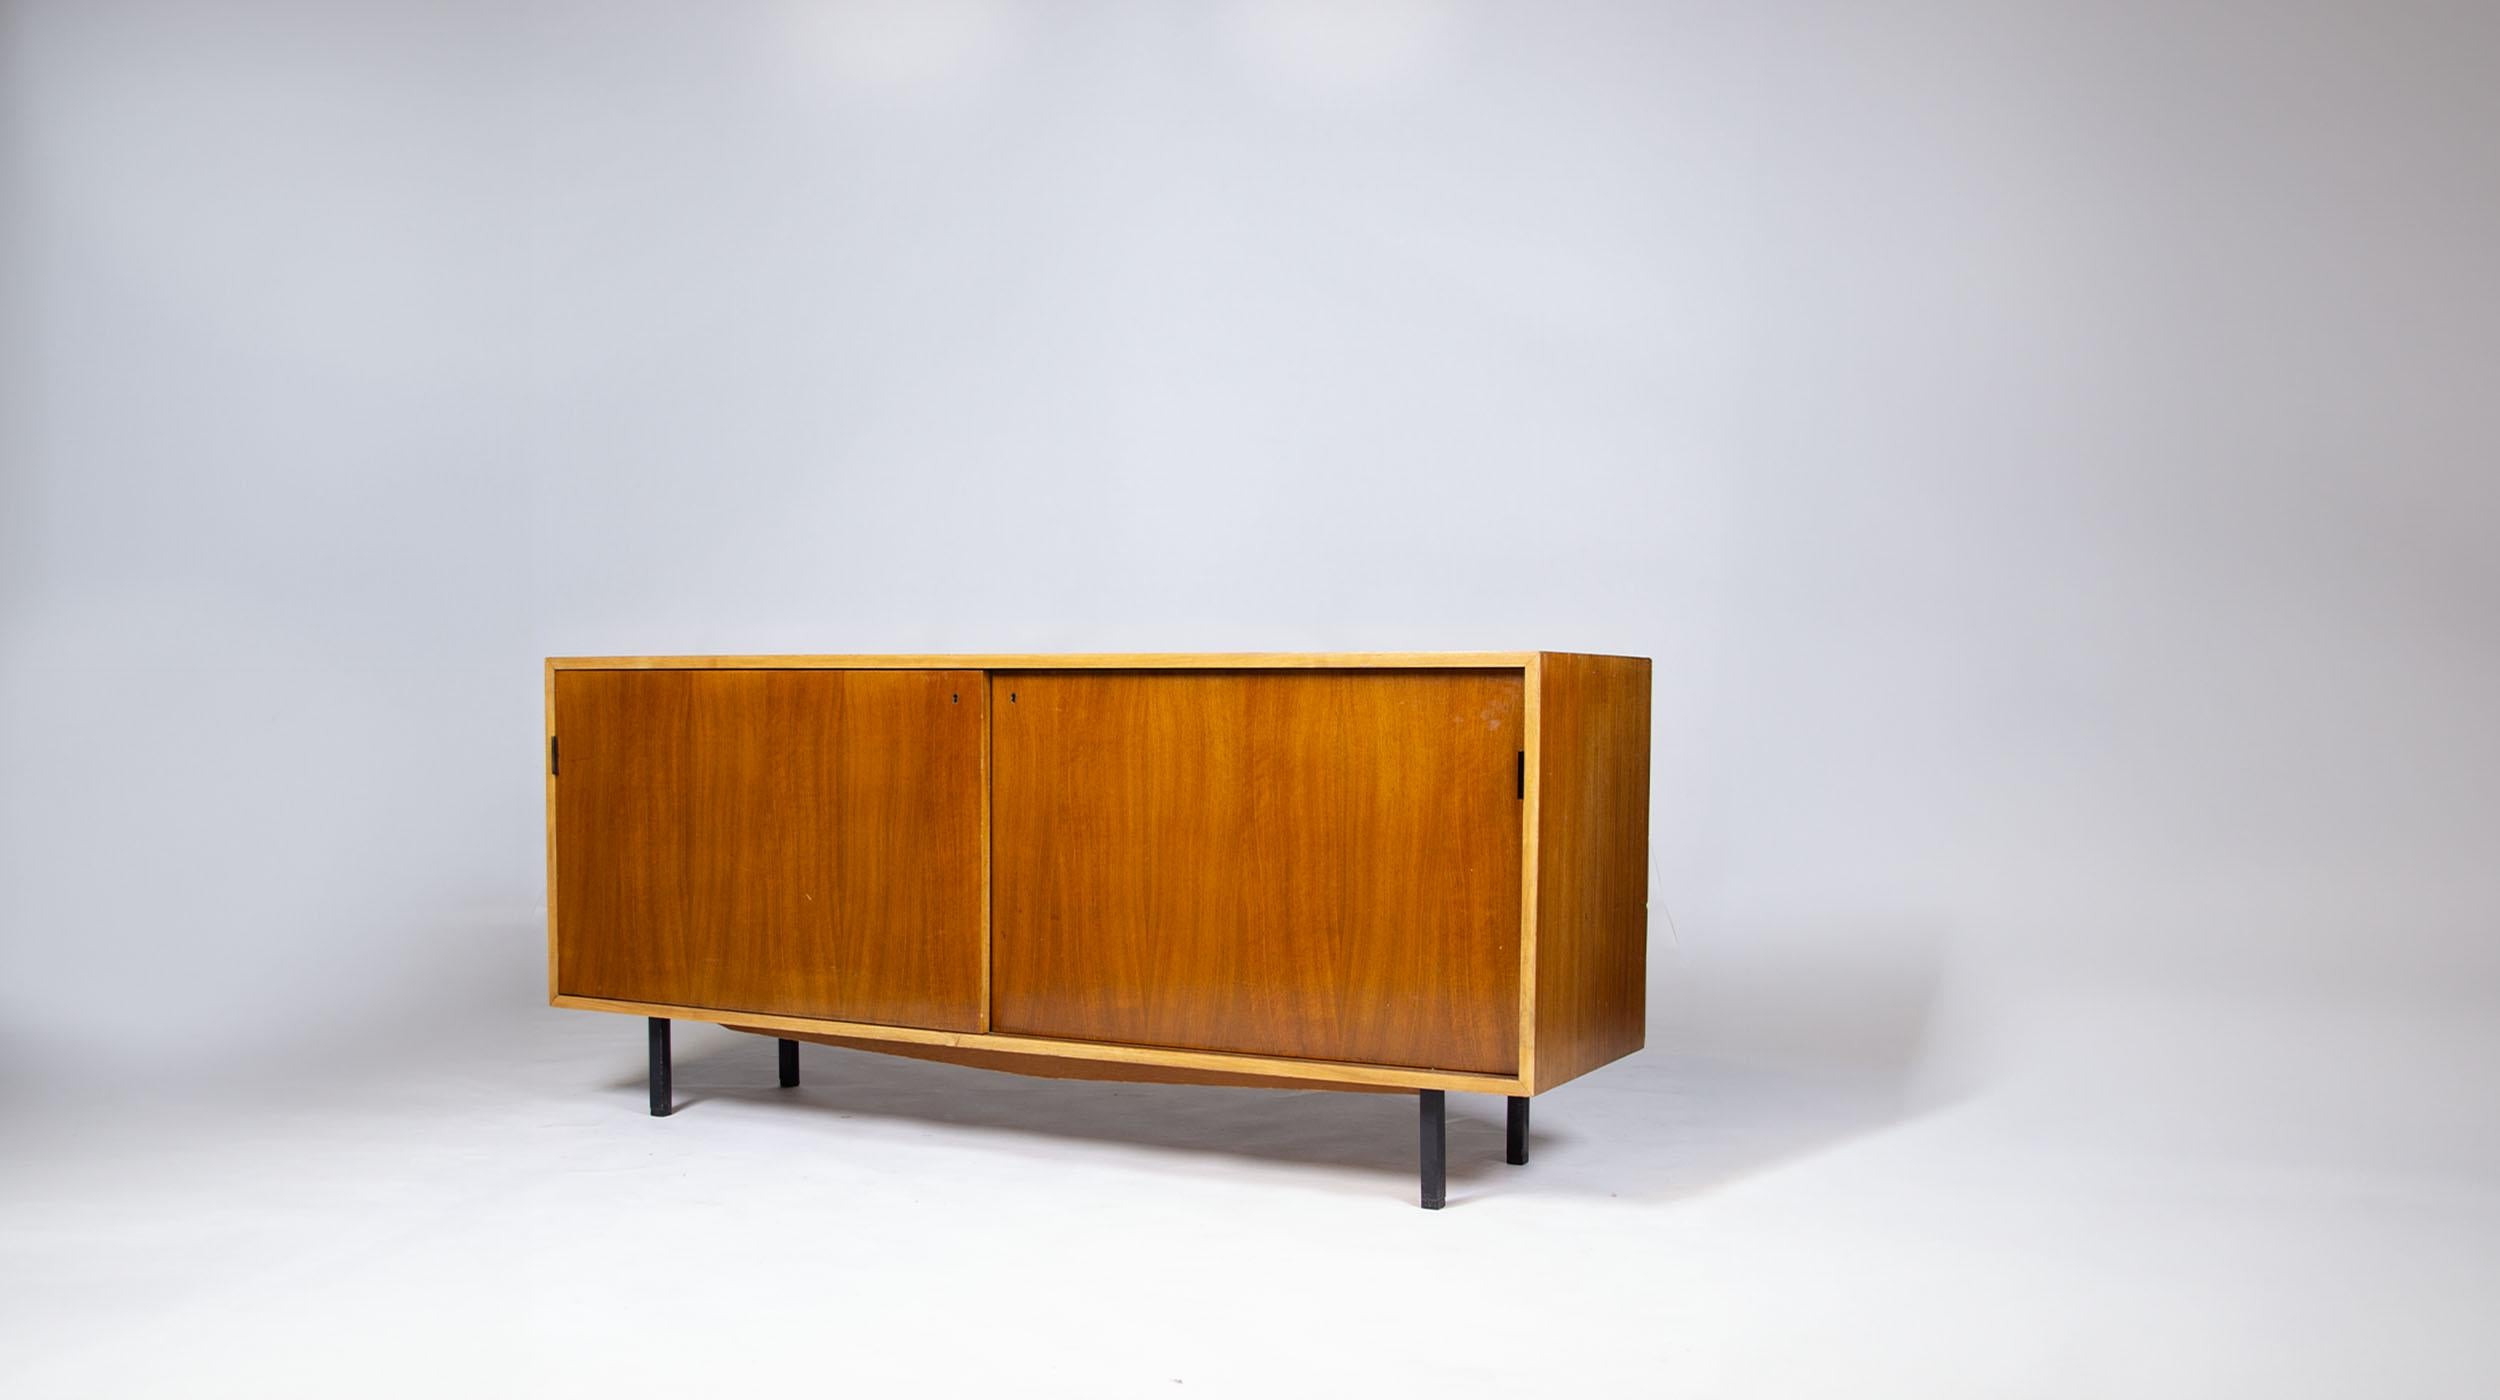 Florence Knoll walnut sideboard, Knoll International edition, 1960s.

Stamped on the back with the Knoll International plaque.

Opening with two sliding doors and black lacquered steel handles. First version with its antique lock (does not have the